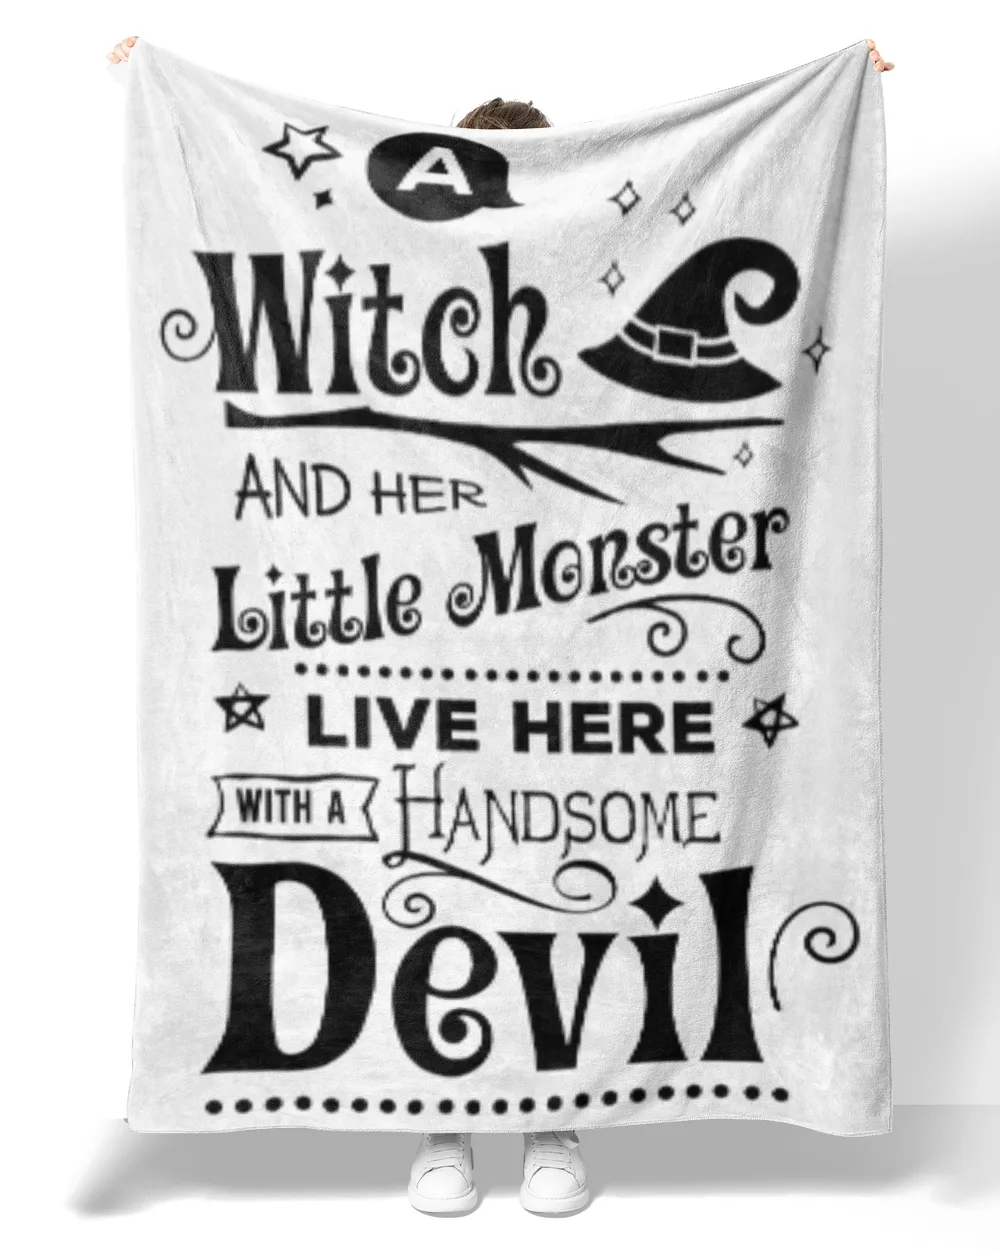 A Witch and her little monster live here with a handsome devil